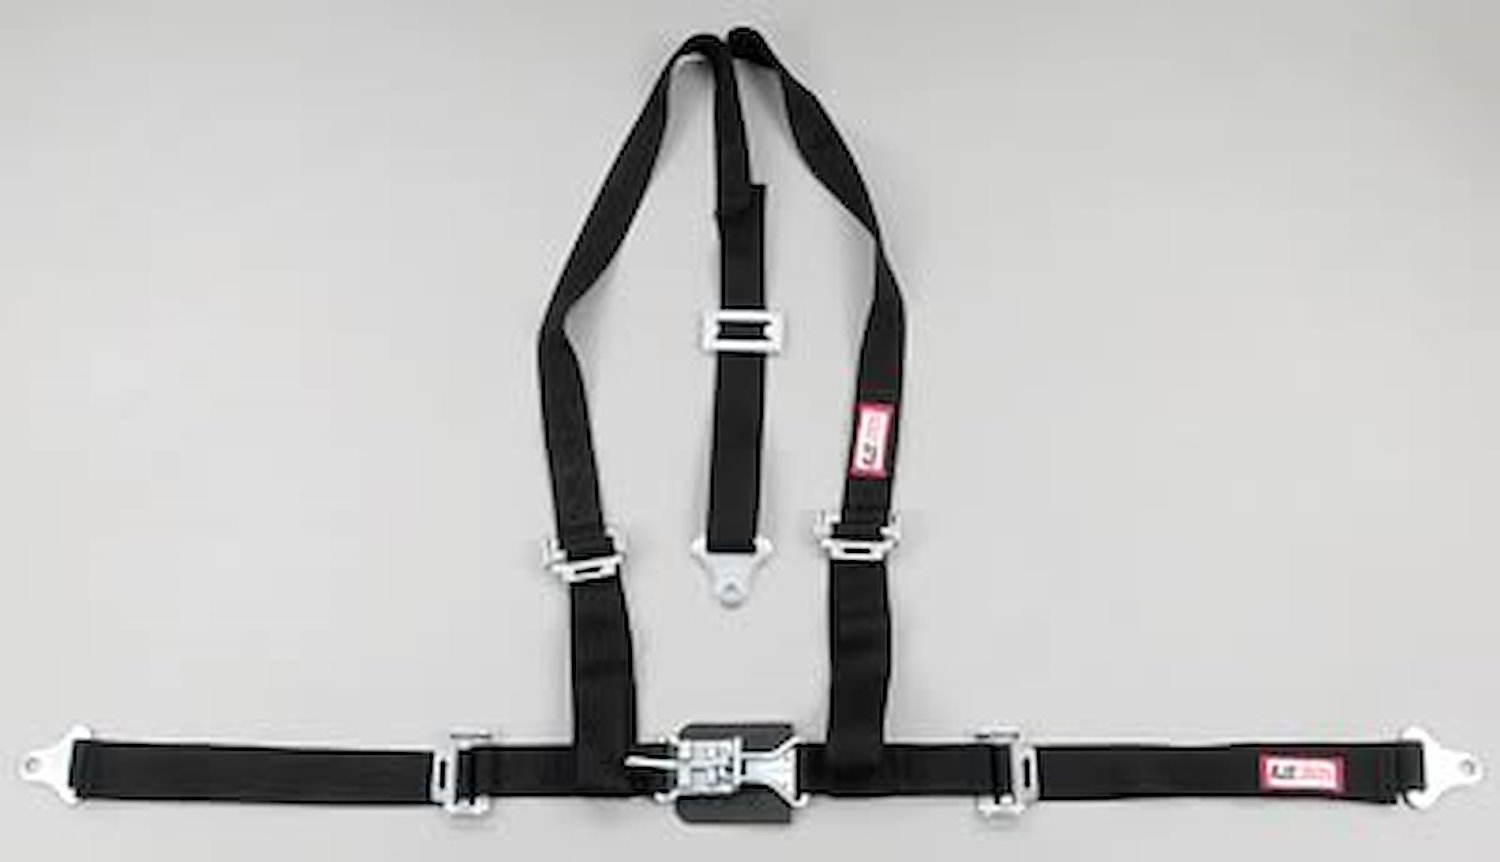 NON-SFI L&L HARNESS 3 PULL UP Lap Belt SNAP SEWN IN 2 S.H. Individual ROLL BAR Mount WRAP/SNAP BLUE